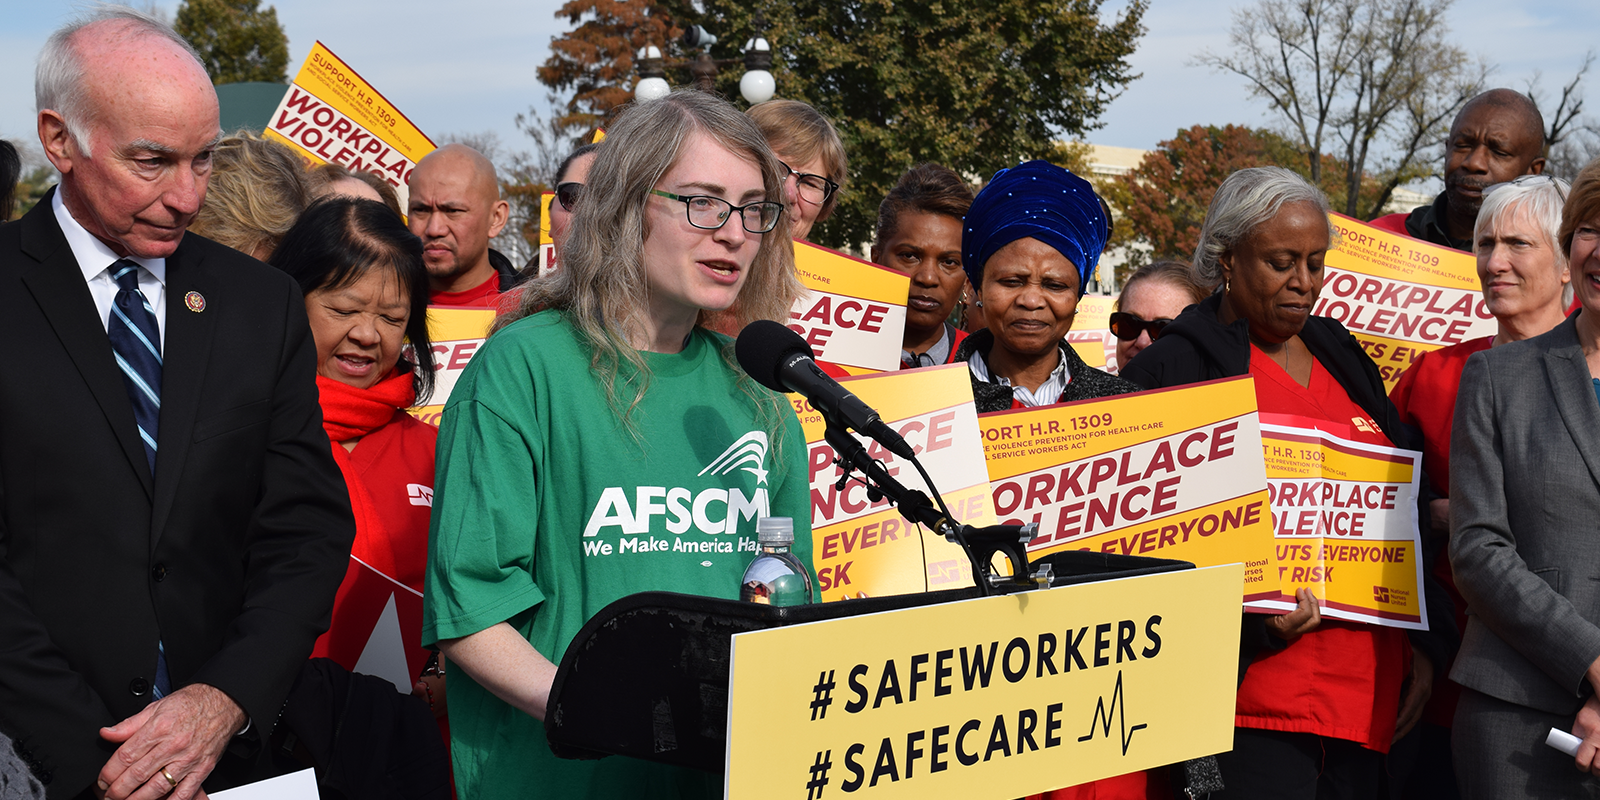 AFSCME member and social worker Miriam Doyle speaks at rally with Rep. Joe Courtney